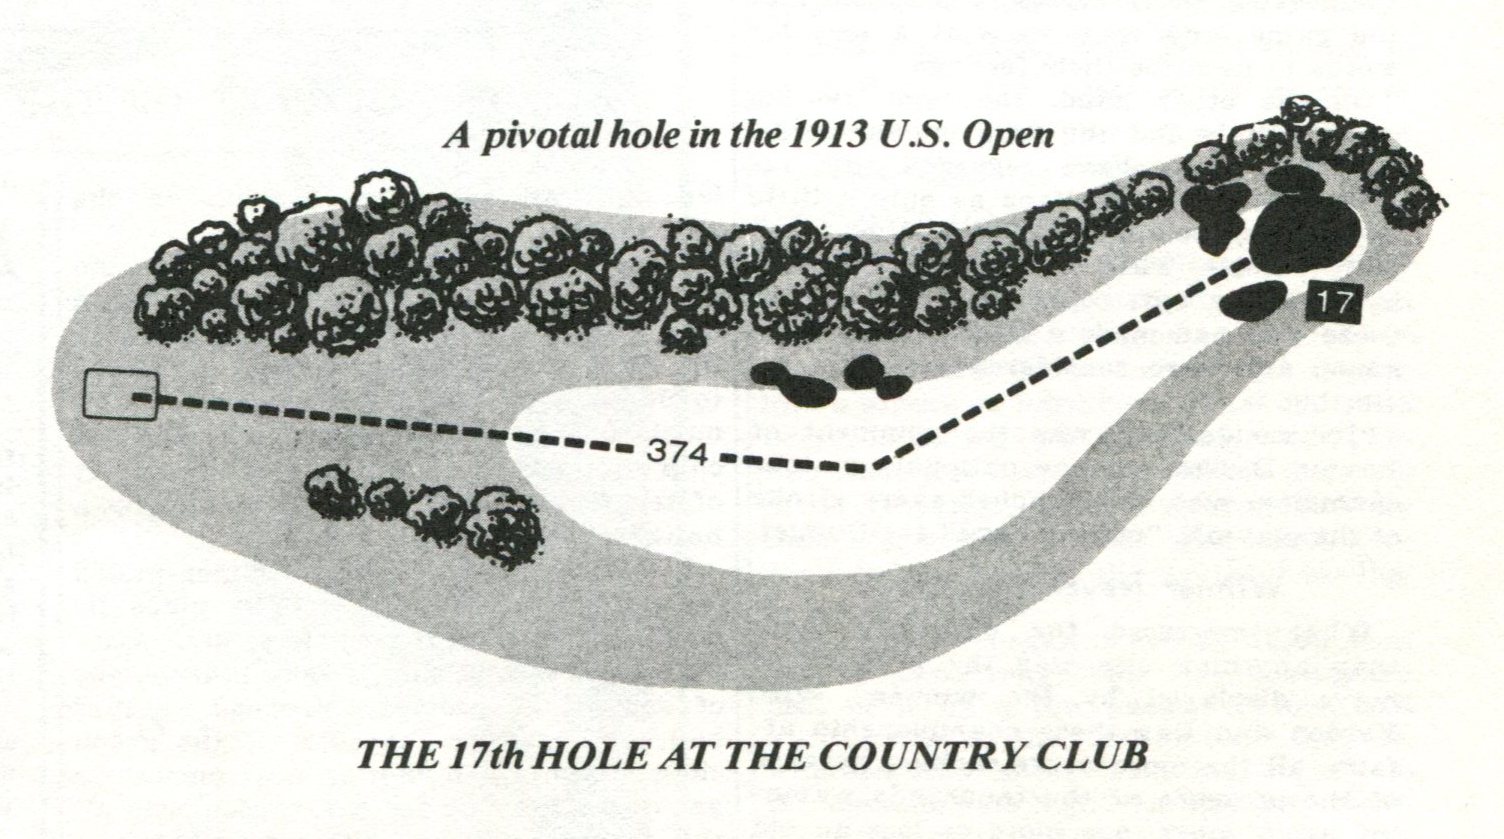 A drawing of the 17th hole at The Country Club, Brookline as it would have played in 1913.